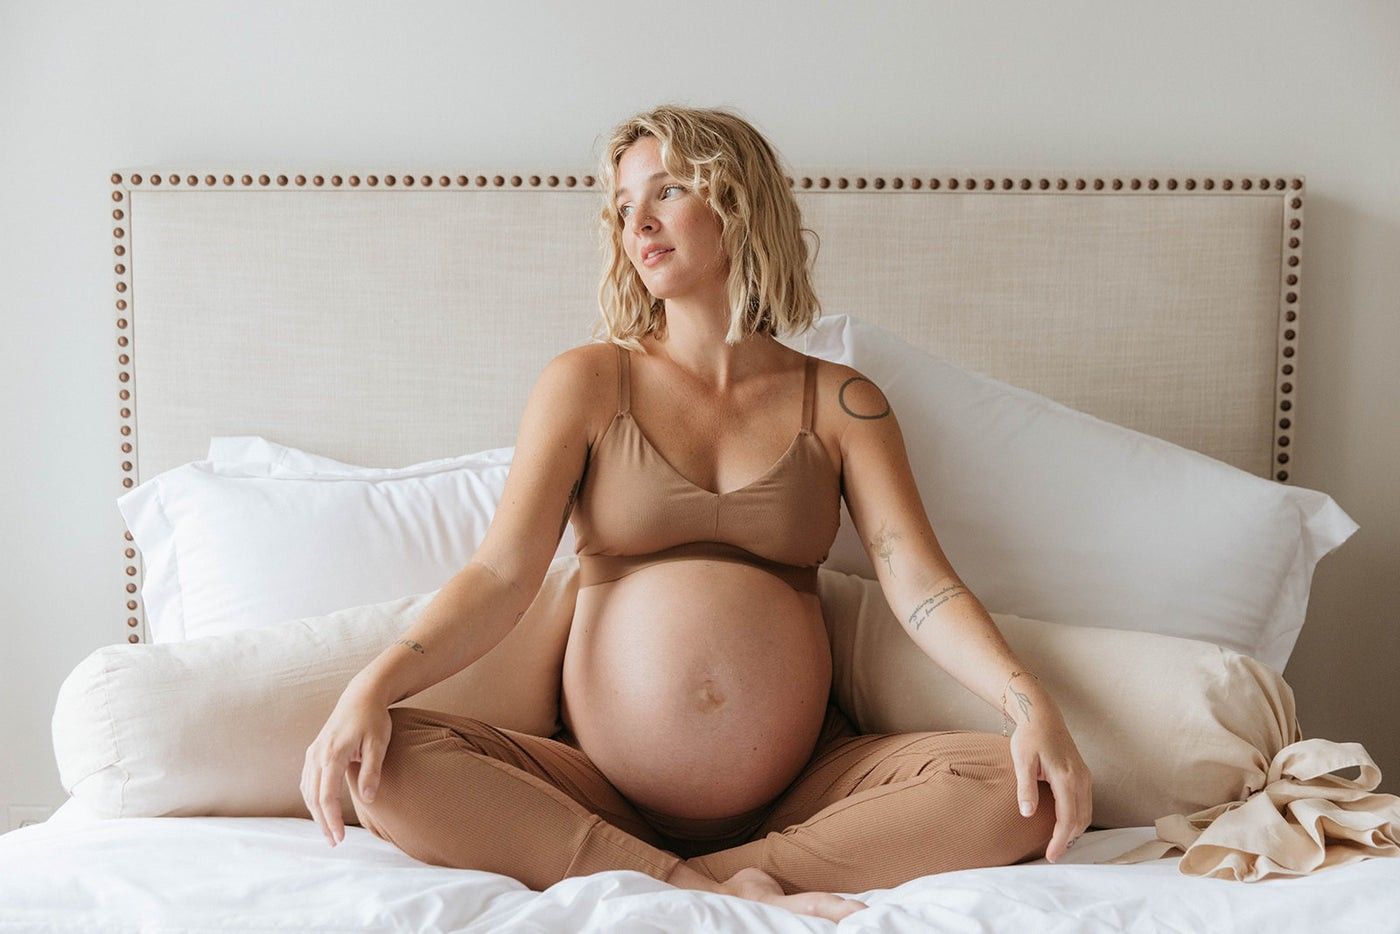 Get The Best Gift For Pregnant Wife: 10 Great Ideas To Nourish And Cherish  Her During Her Pregnancy